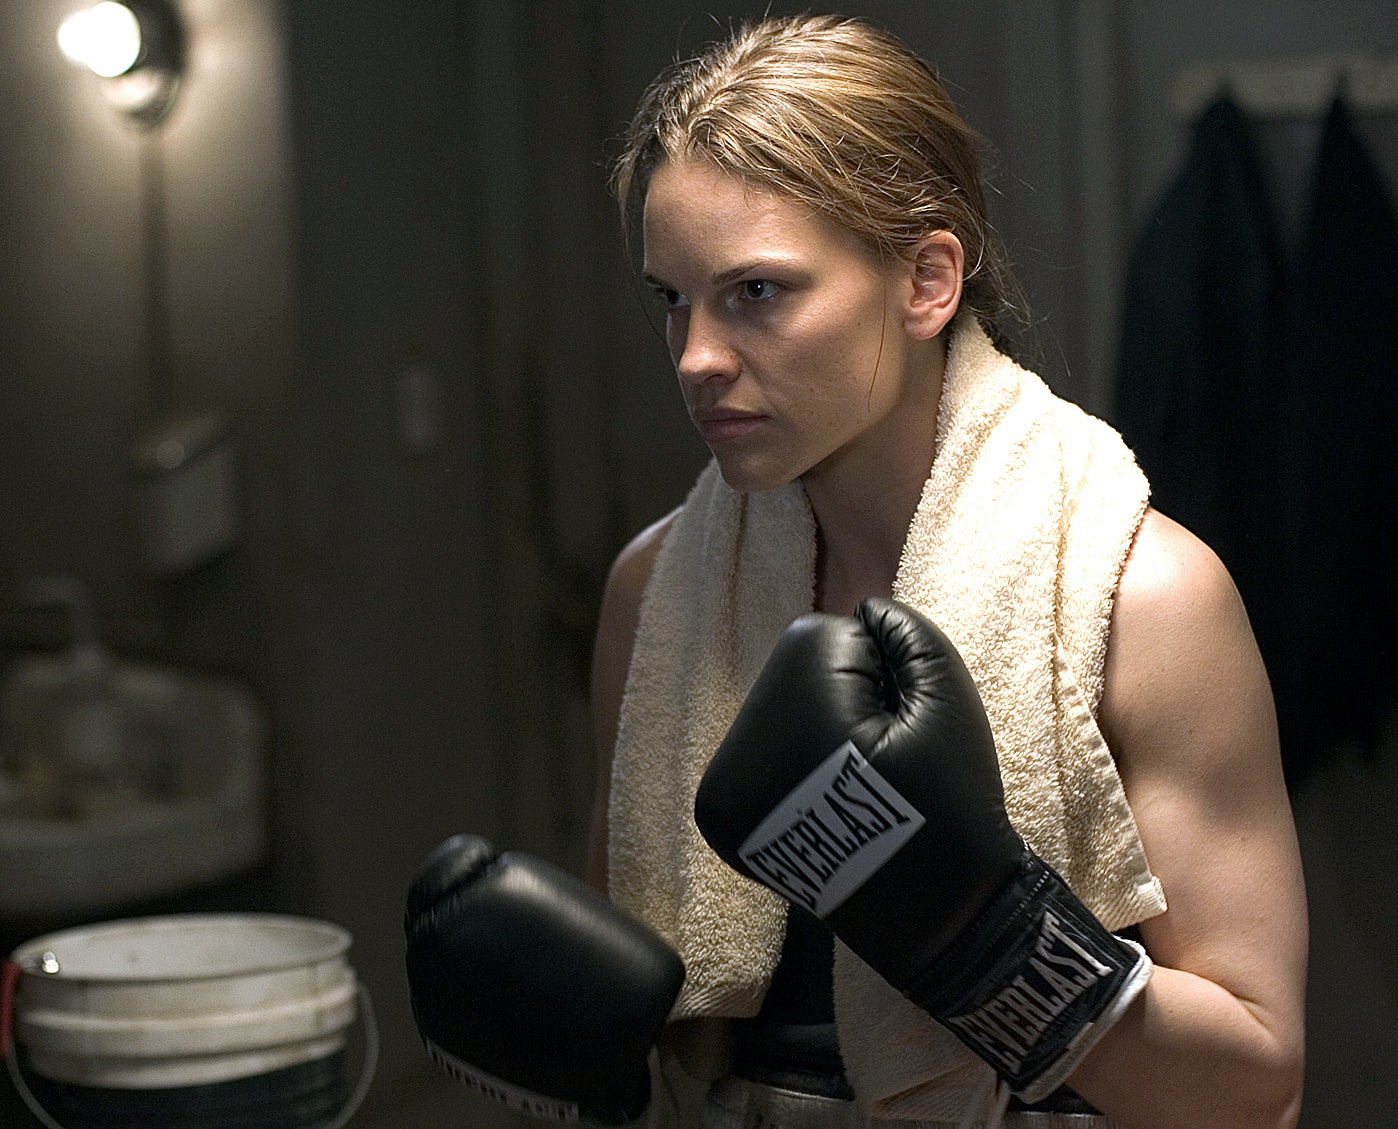 Hilary in &quot;Million Dollar Baby&quot;